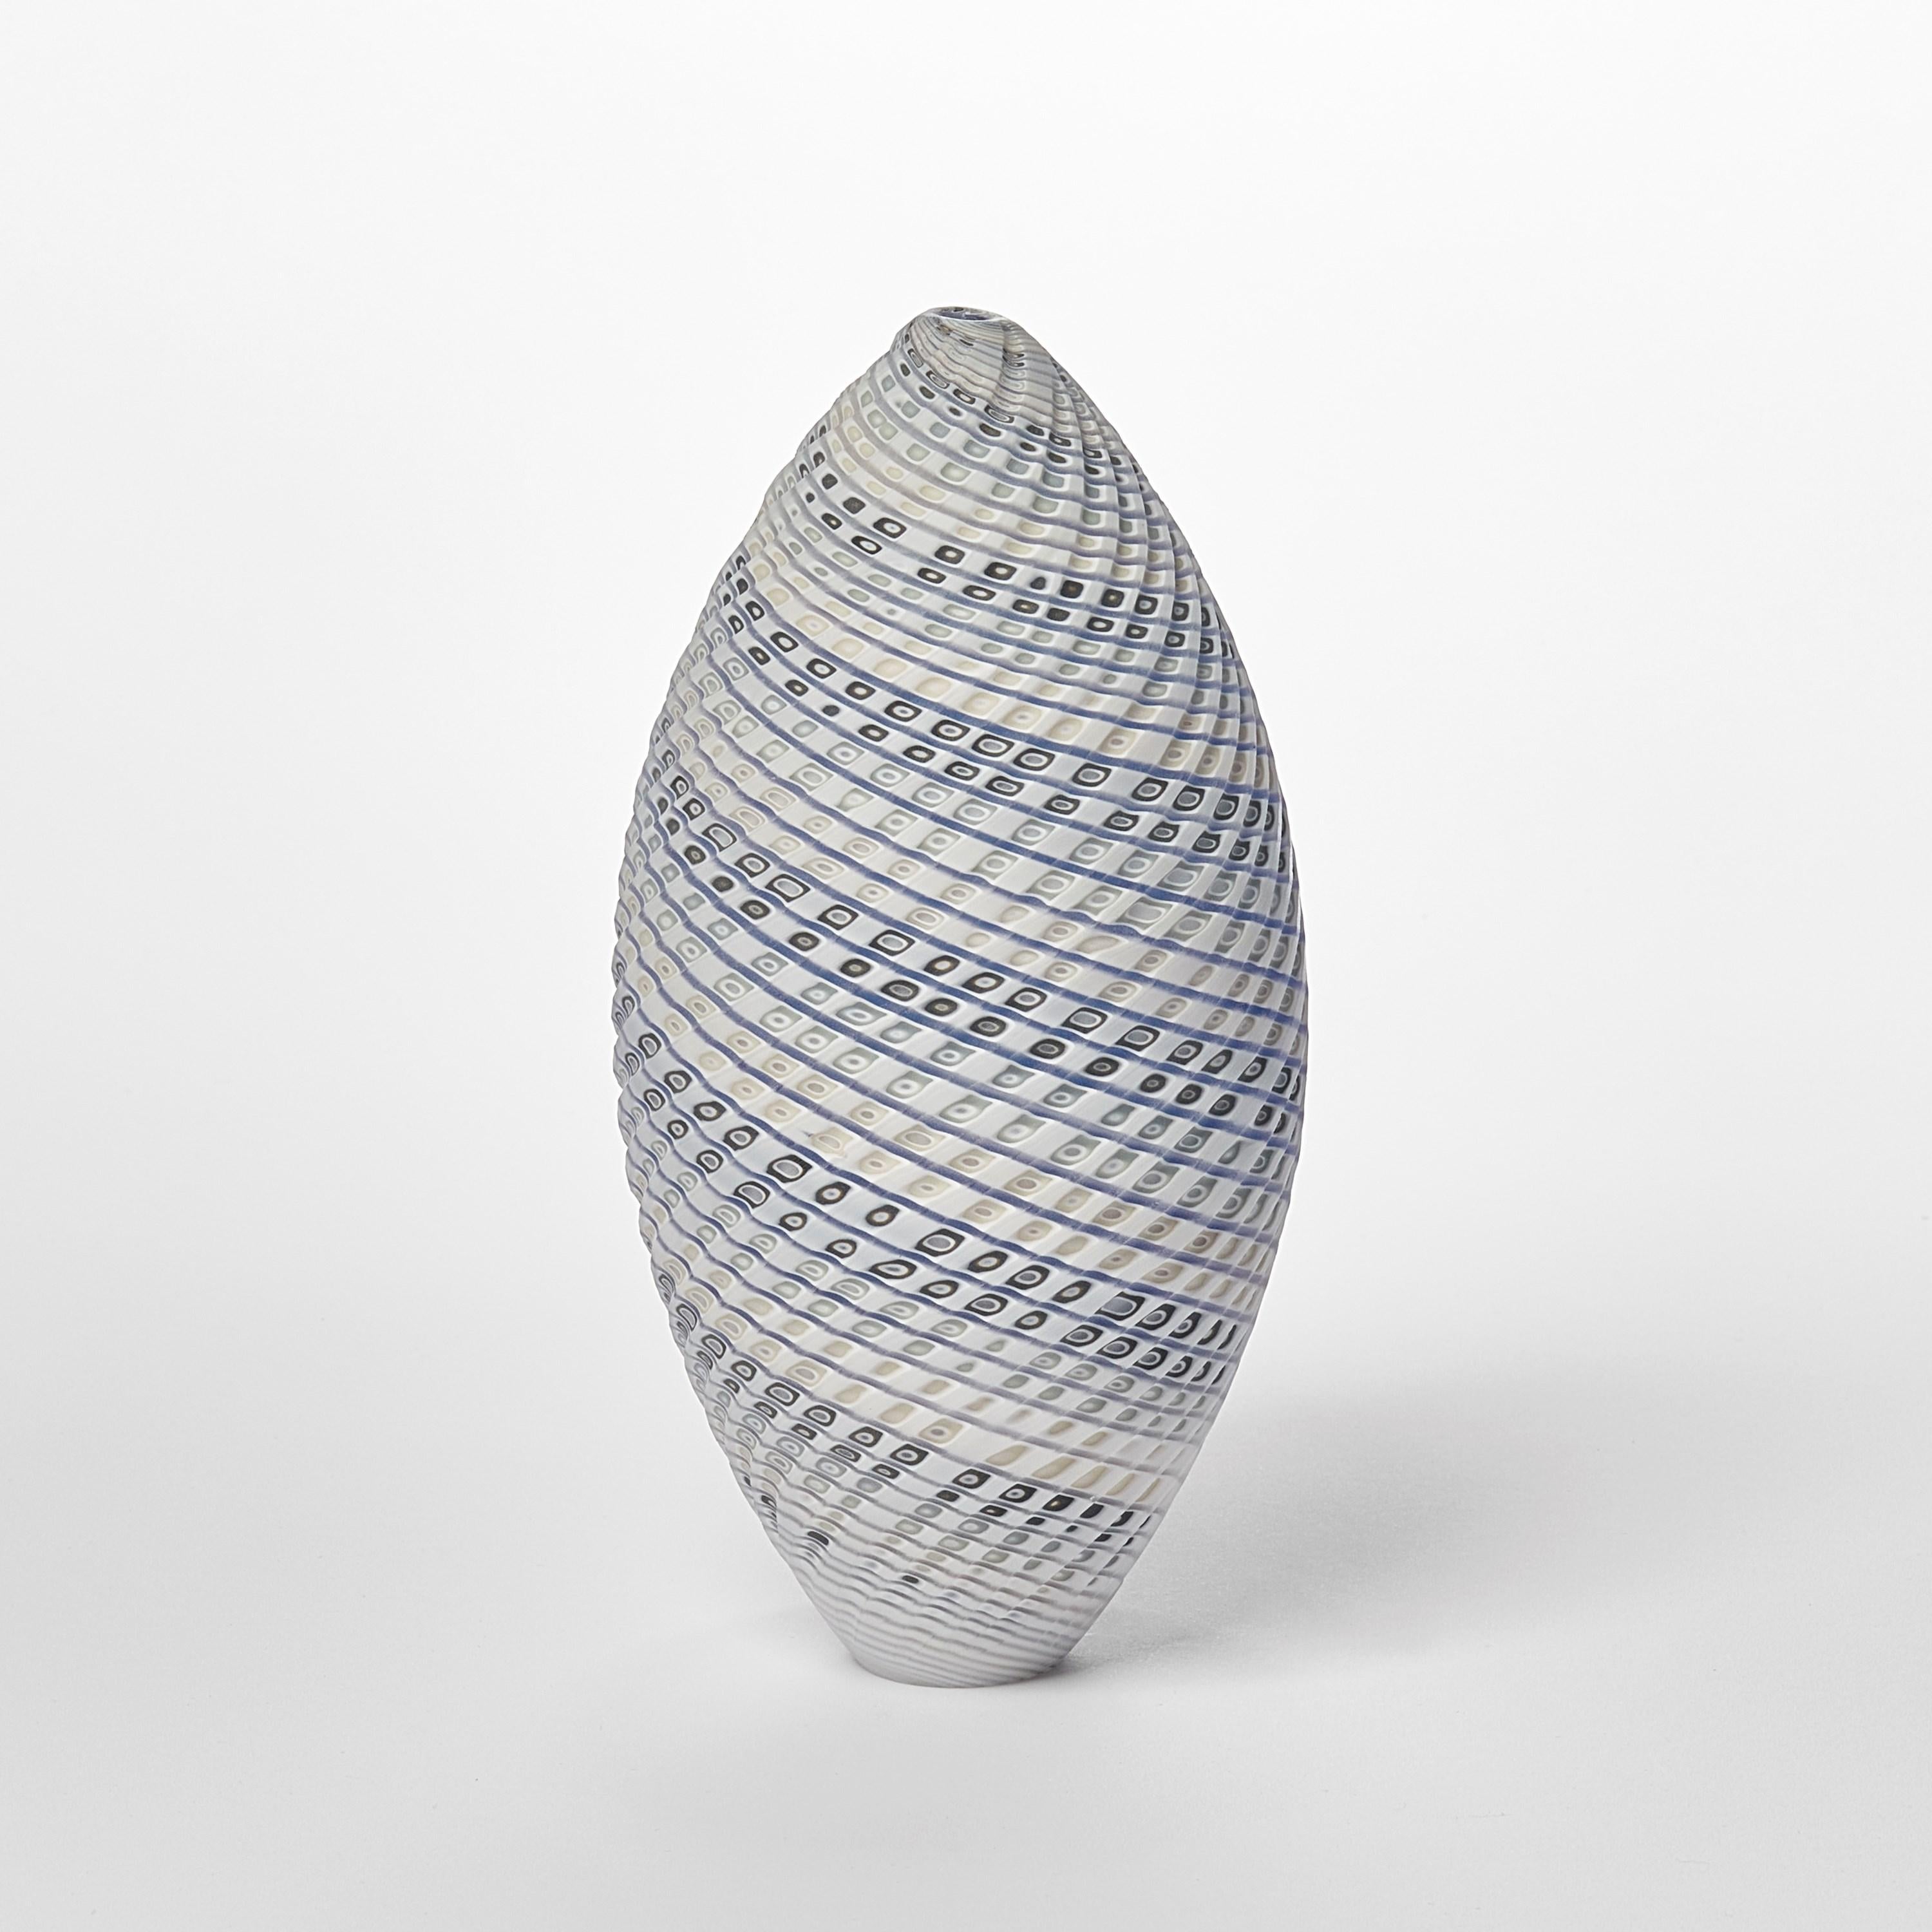 'Woven Three Tone Blue Ovoid (sm)' is a unique handblown, sculpted and cut glass sculpture by the British artist, Layne Rowe.

Rowe’s inspiration is drawn from the dramatic Devon coastline which informs his love for detail, a constant theme for his